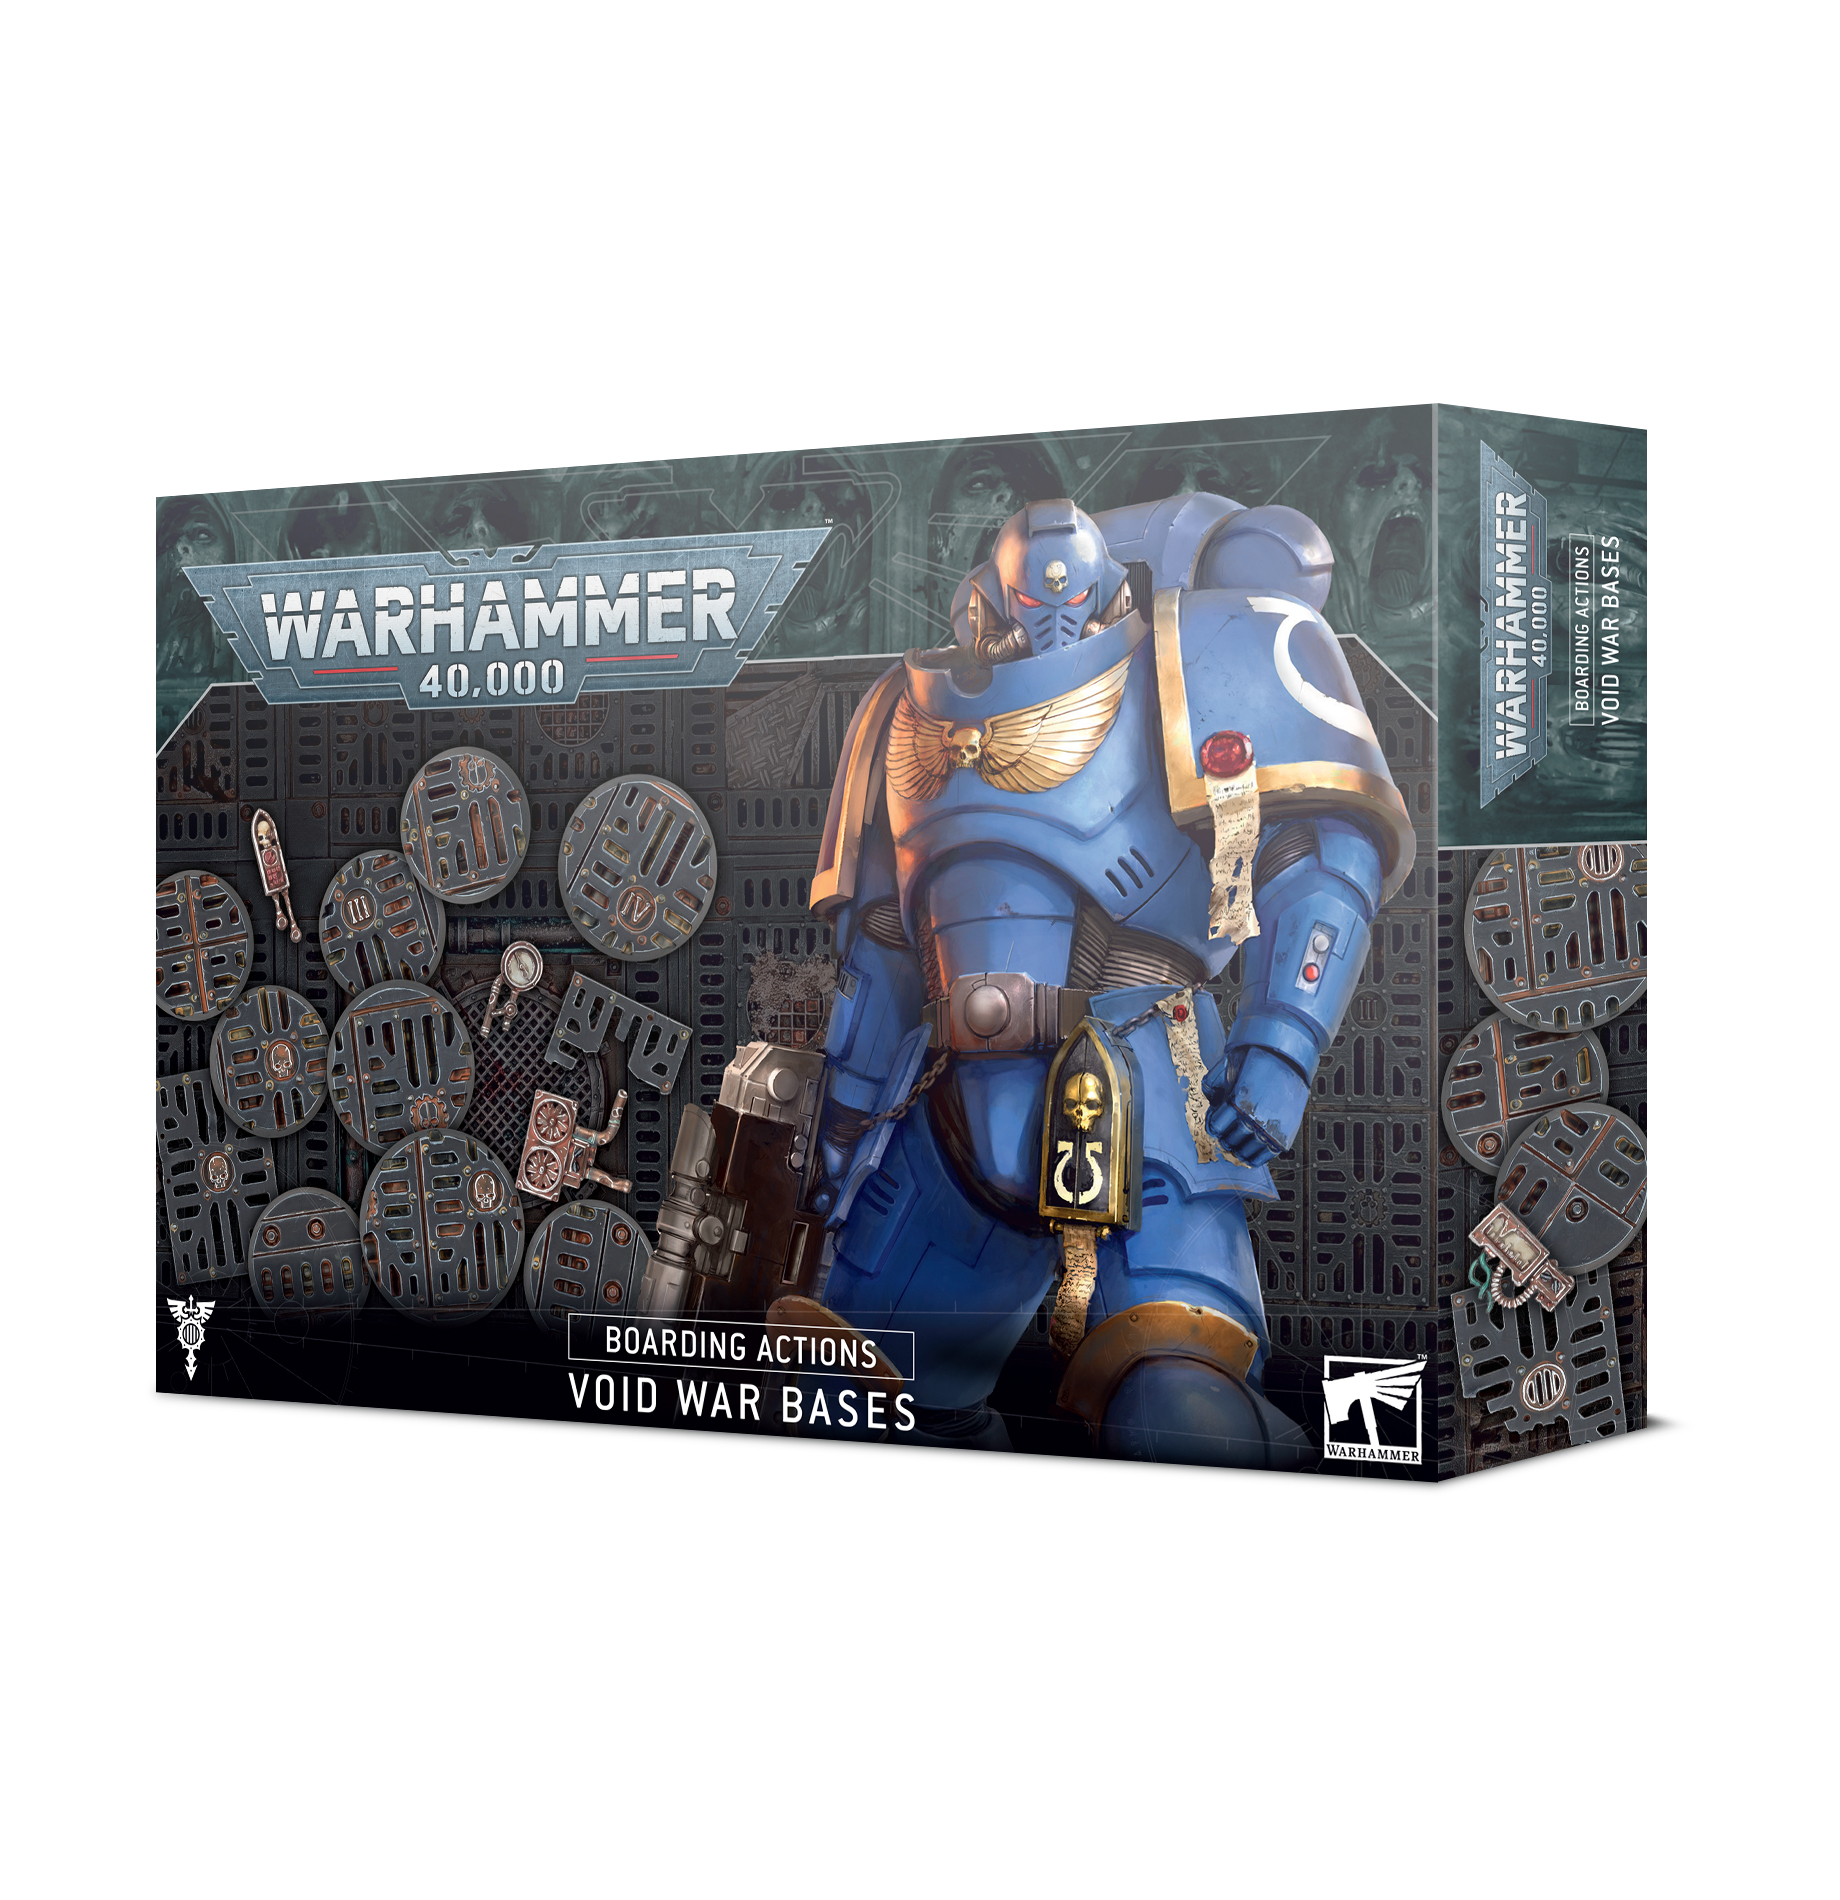 Warhammer 40,000: Boarding Actions: Void War Bases 